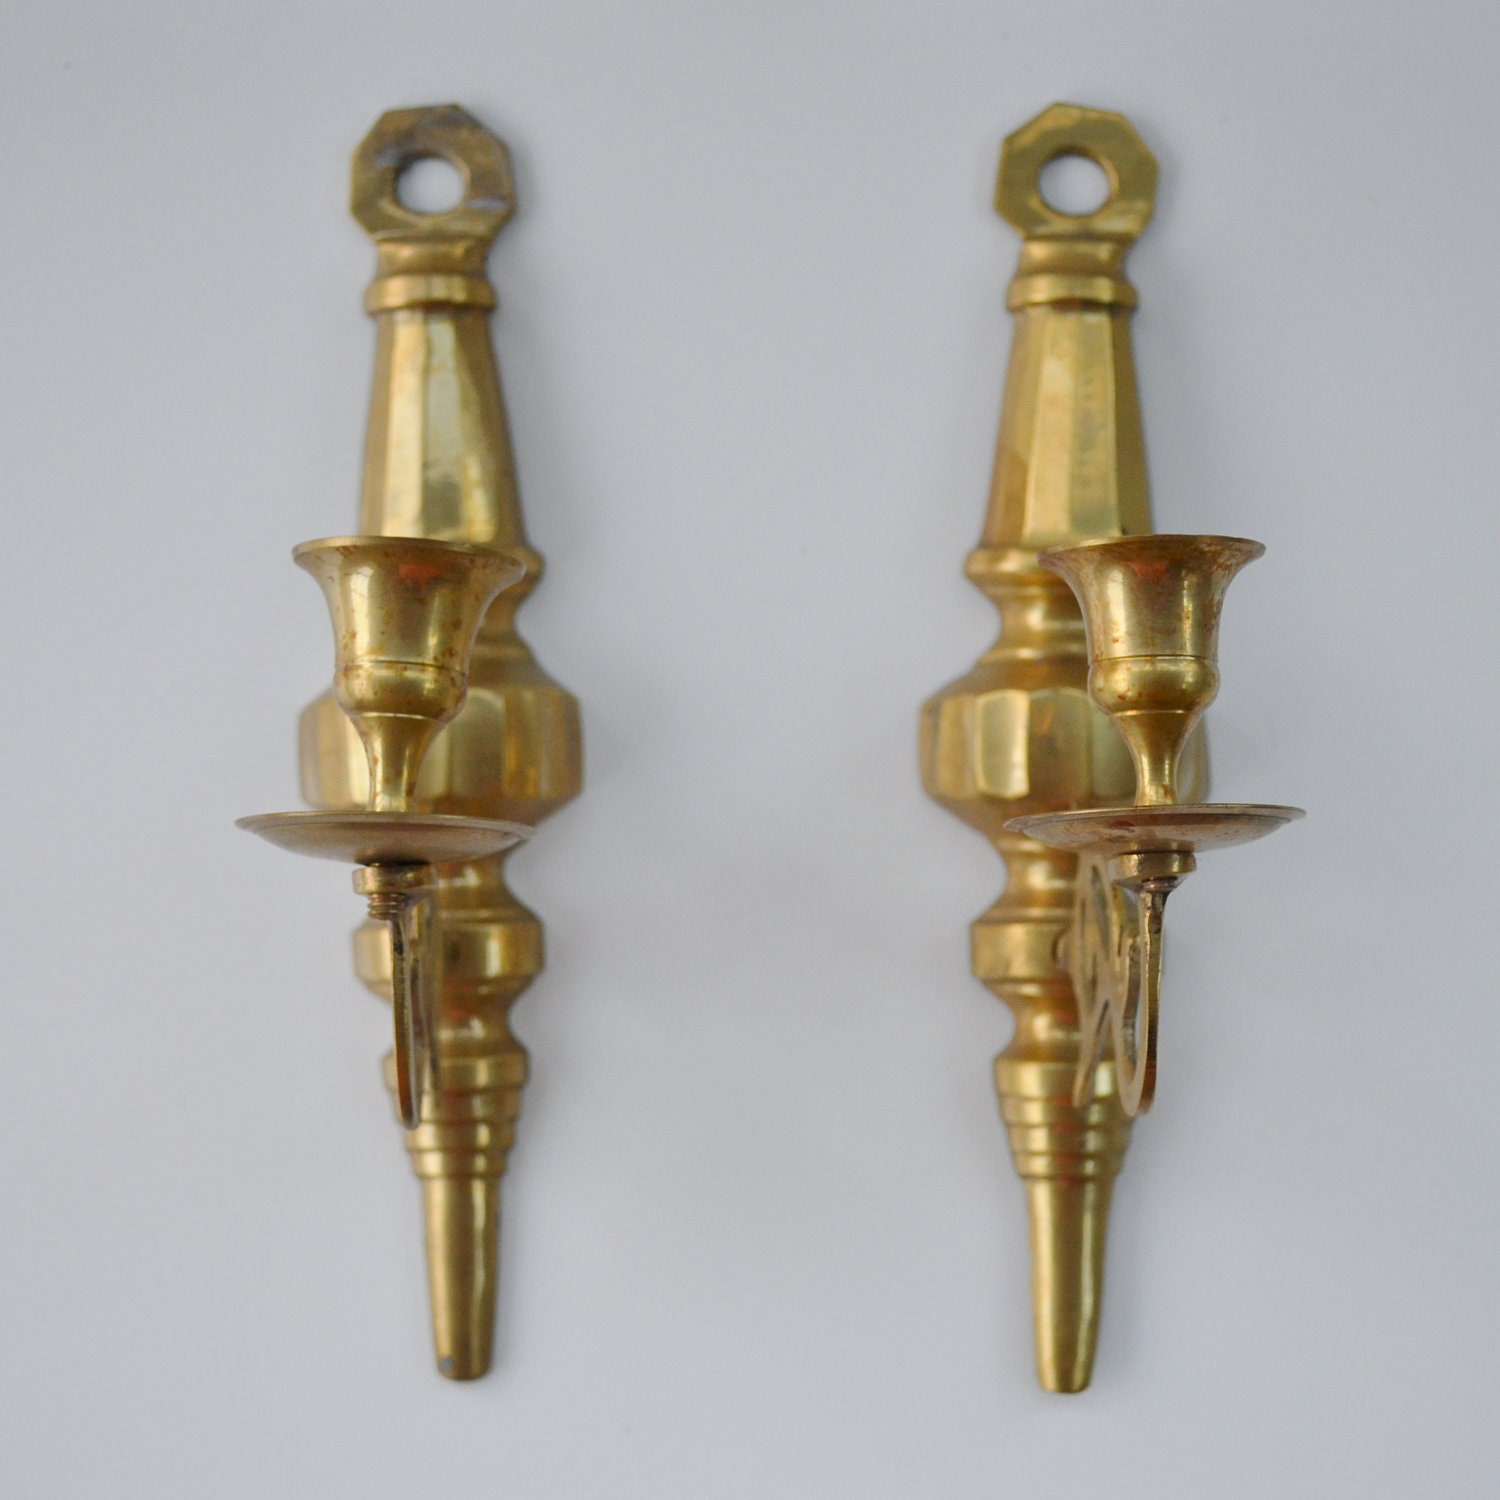 Vintage Pair of Brass Wall Sconces Candle Holders Candelabra